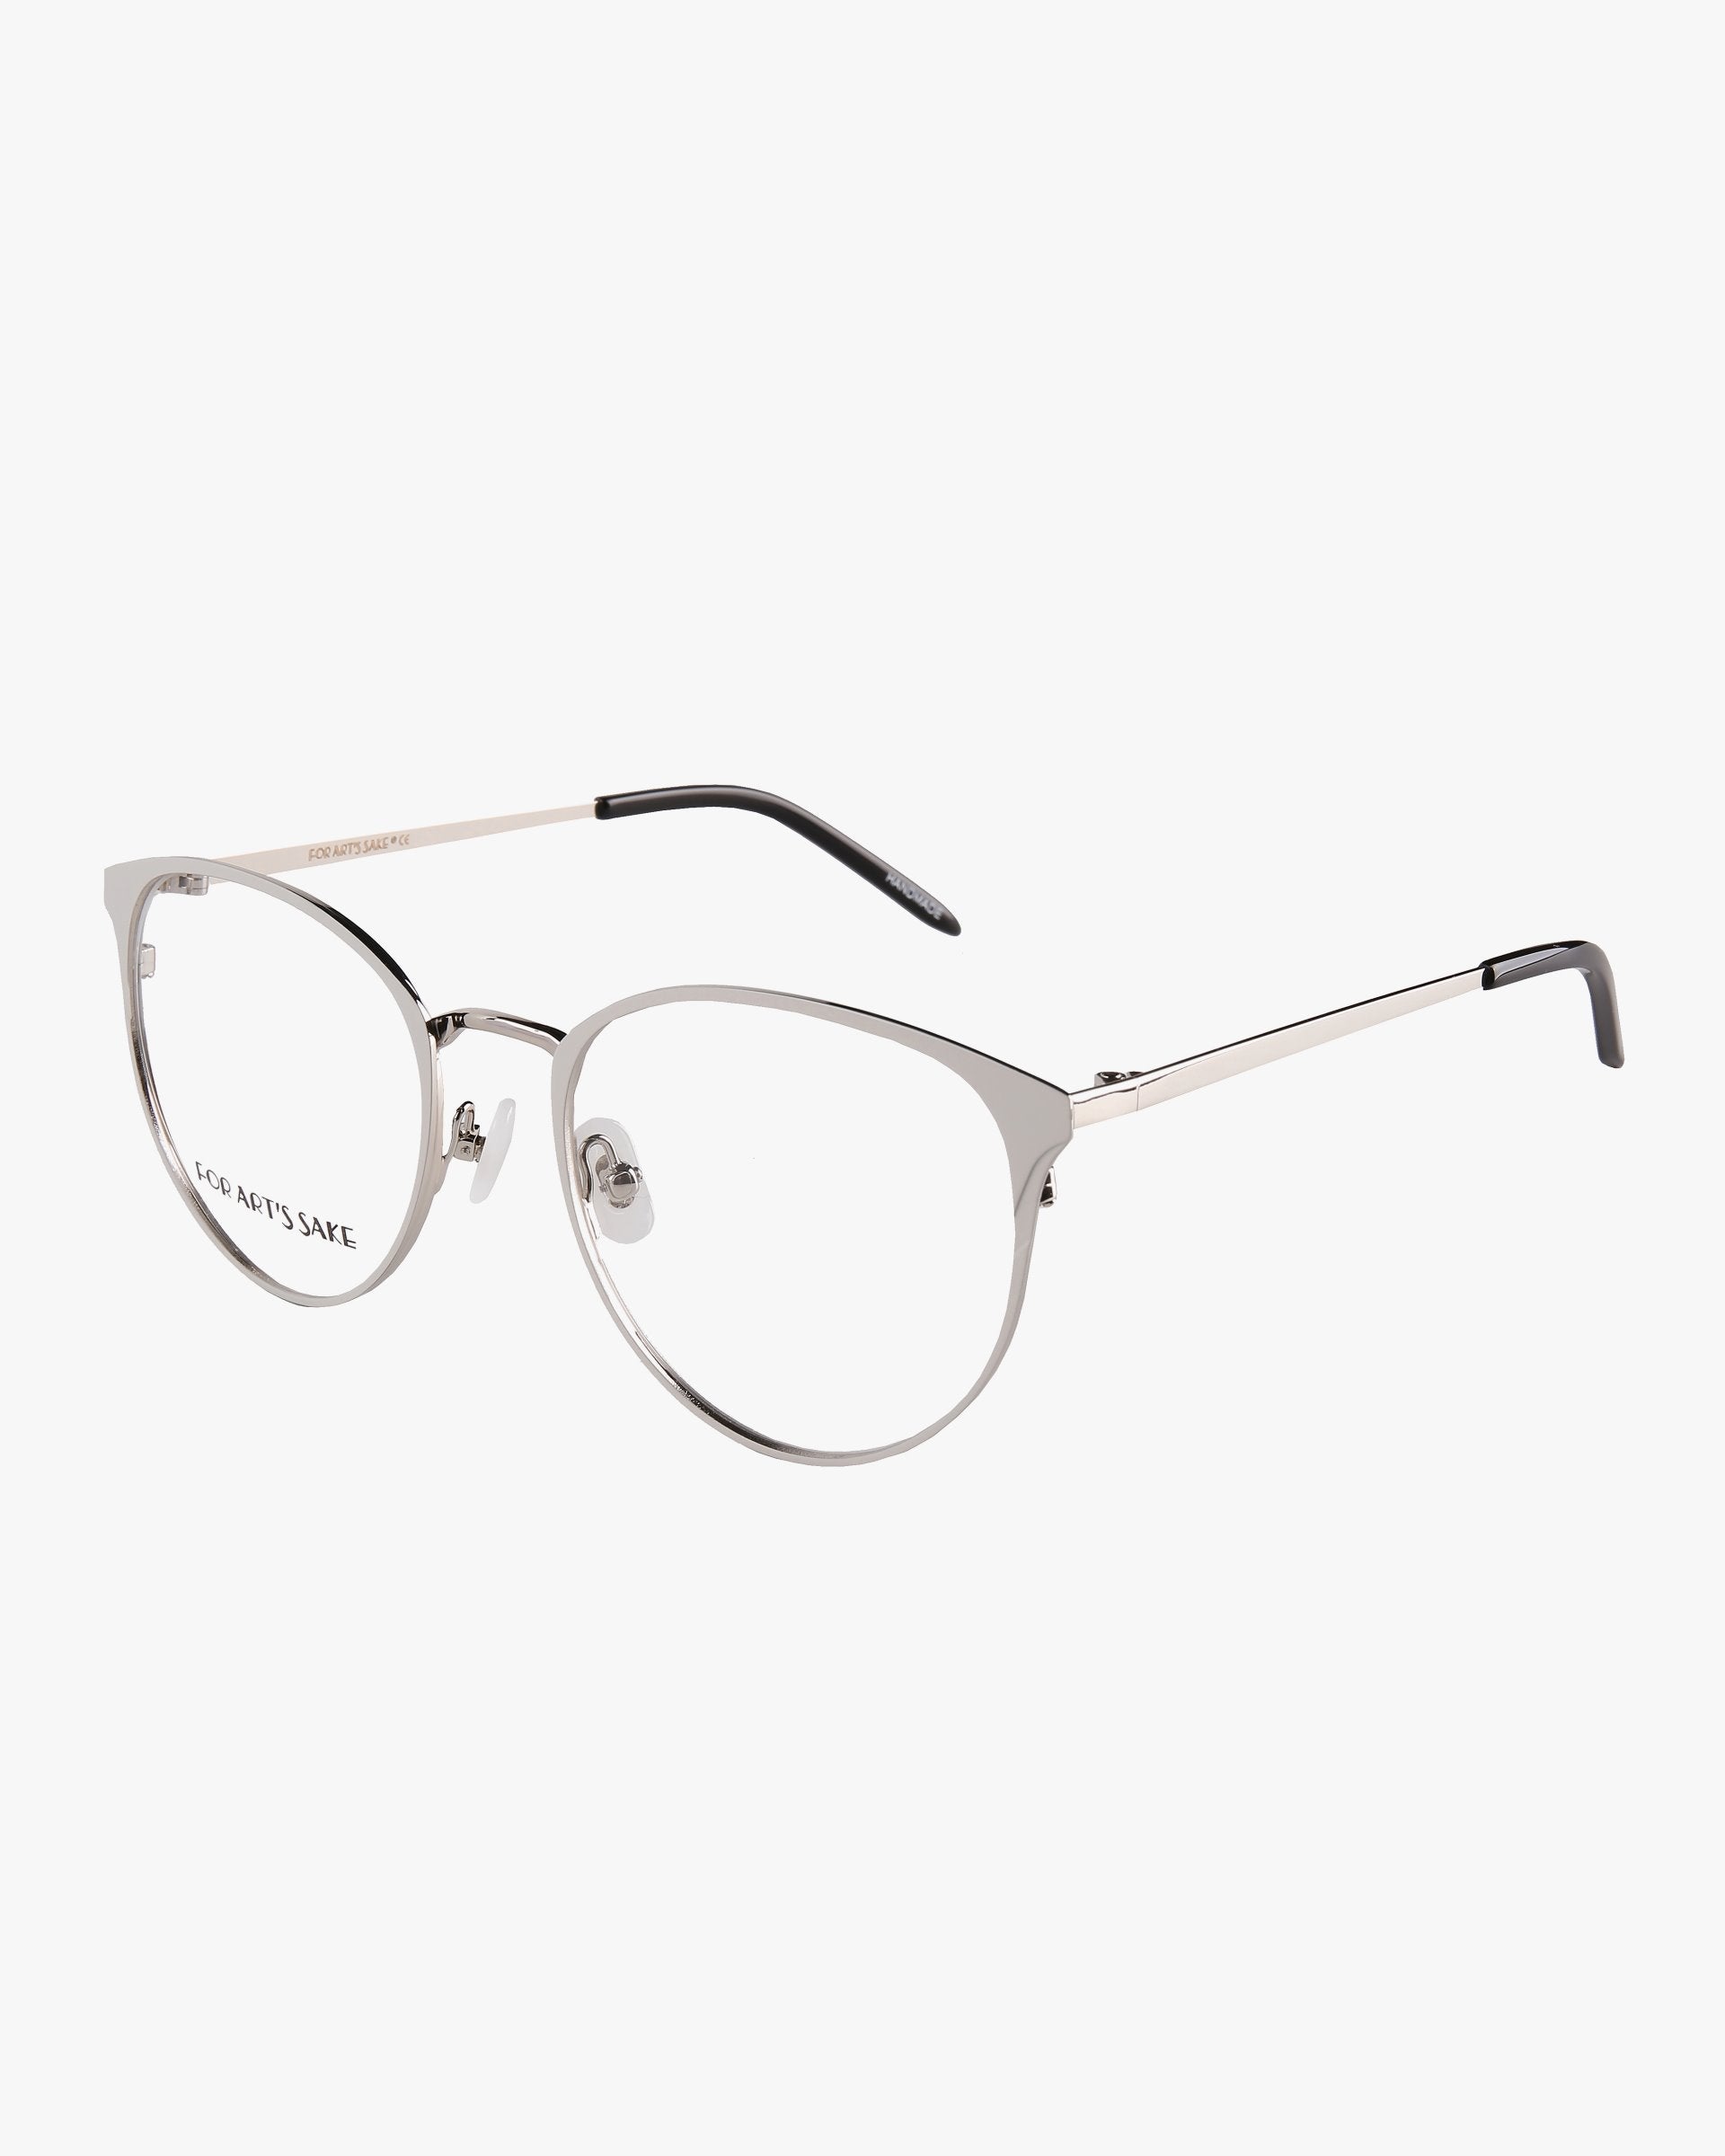 A pair of sleek, modern For Art's Sake® Olivia Grey eyeglasses with thin, metallic silver frames and clear lenses. The temples are straight with black ends, adding a contrasting detail to the design. Featuring a slight cat-eye shape with a minimalist aesthetic, these opticals on sale include an optional prescription service for added convenience.